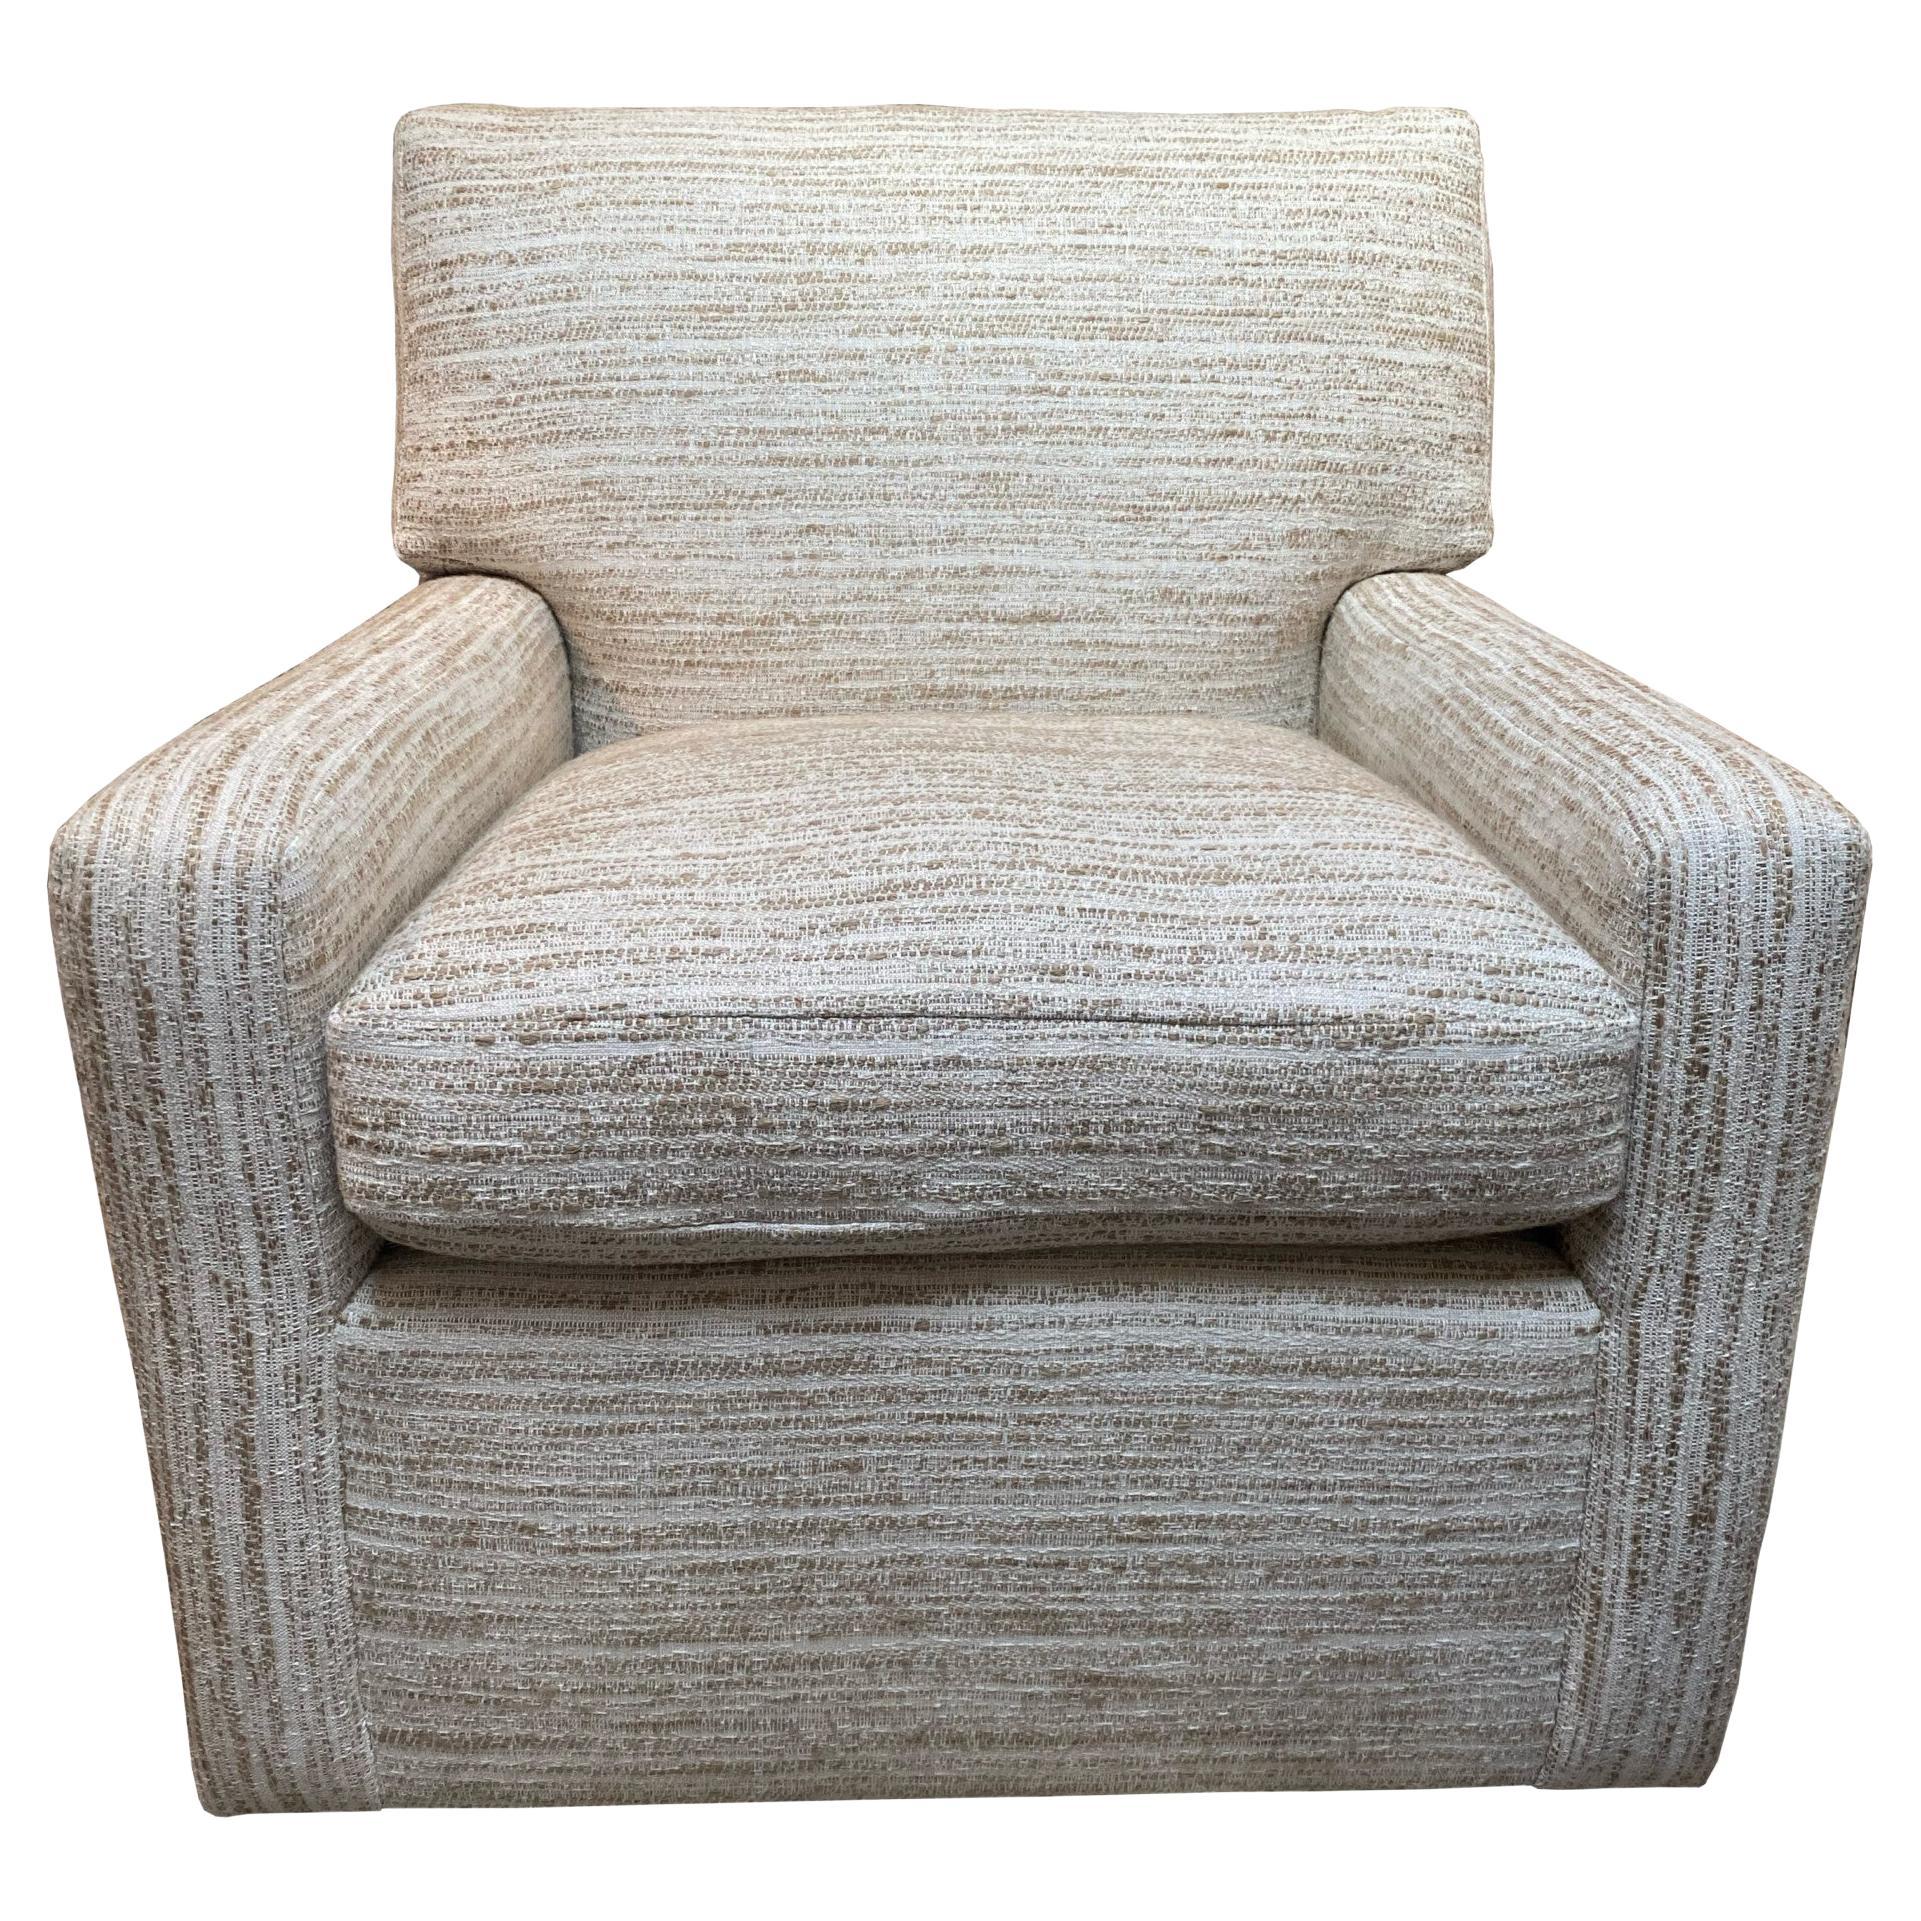 Jean-Michel Frank Style Swivel Chair in a boucle fabric